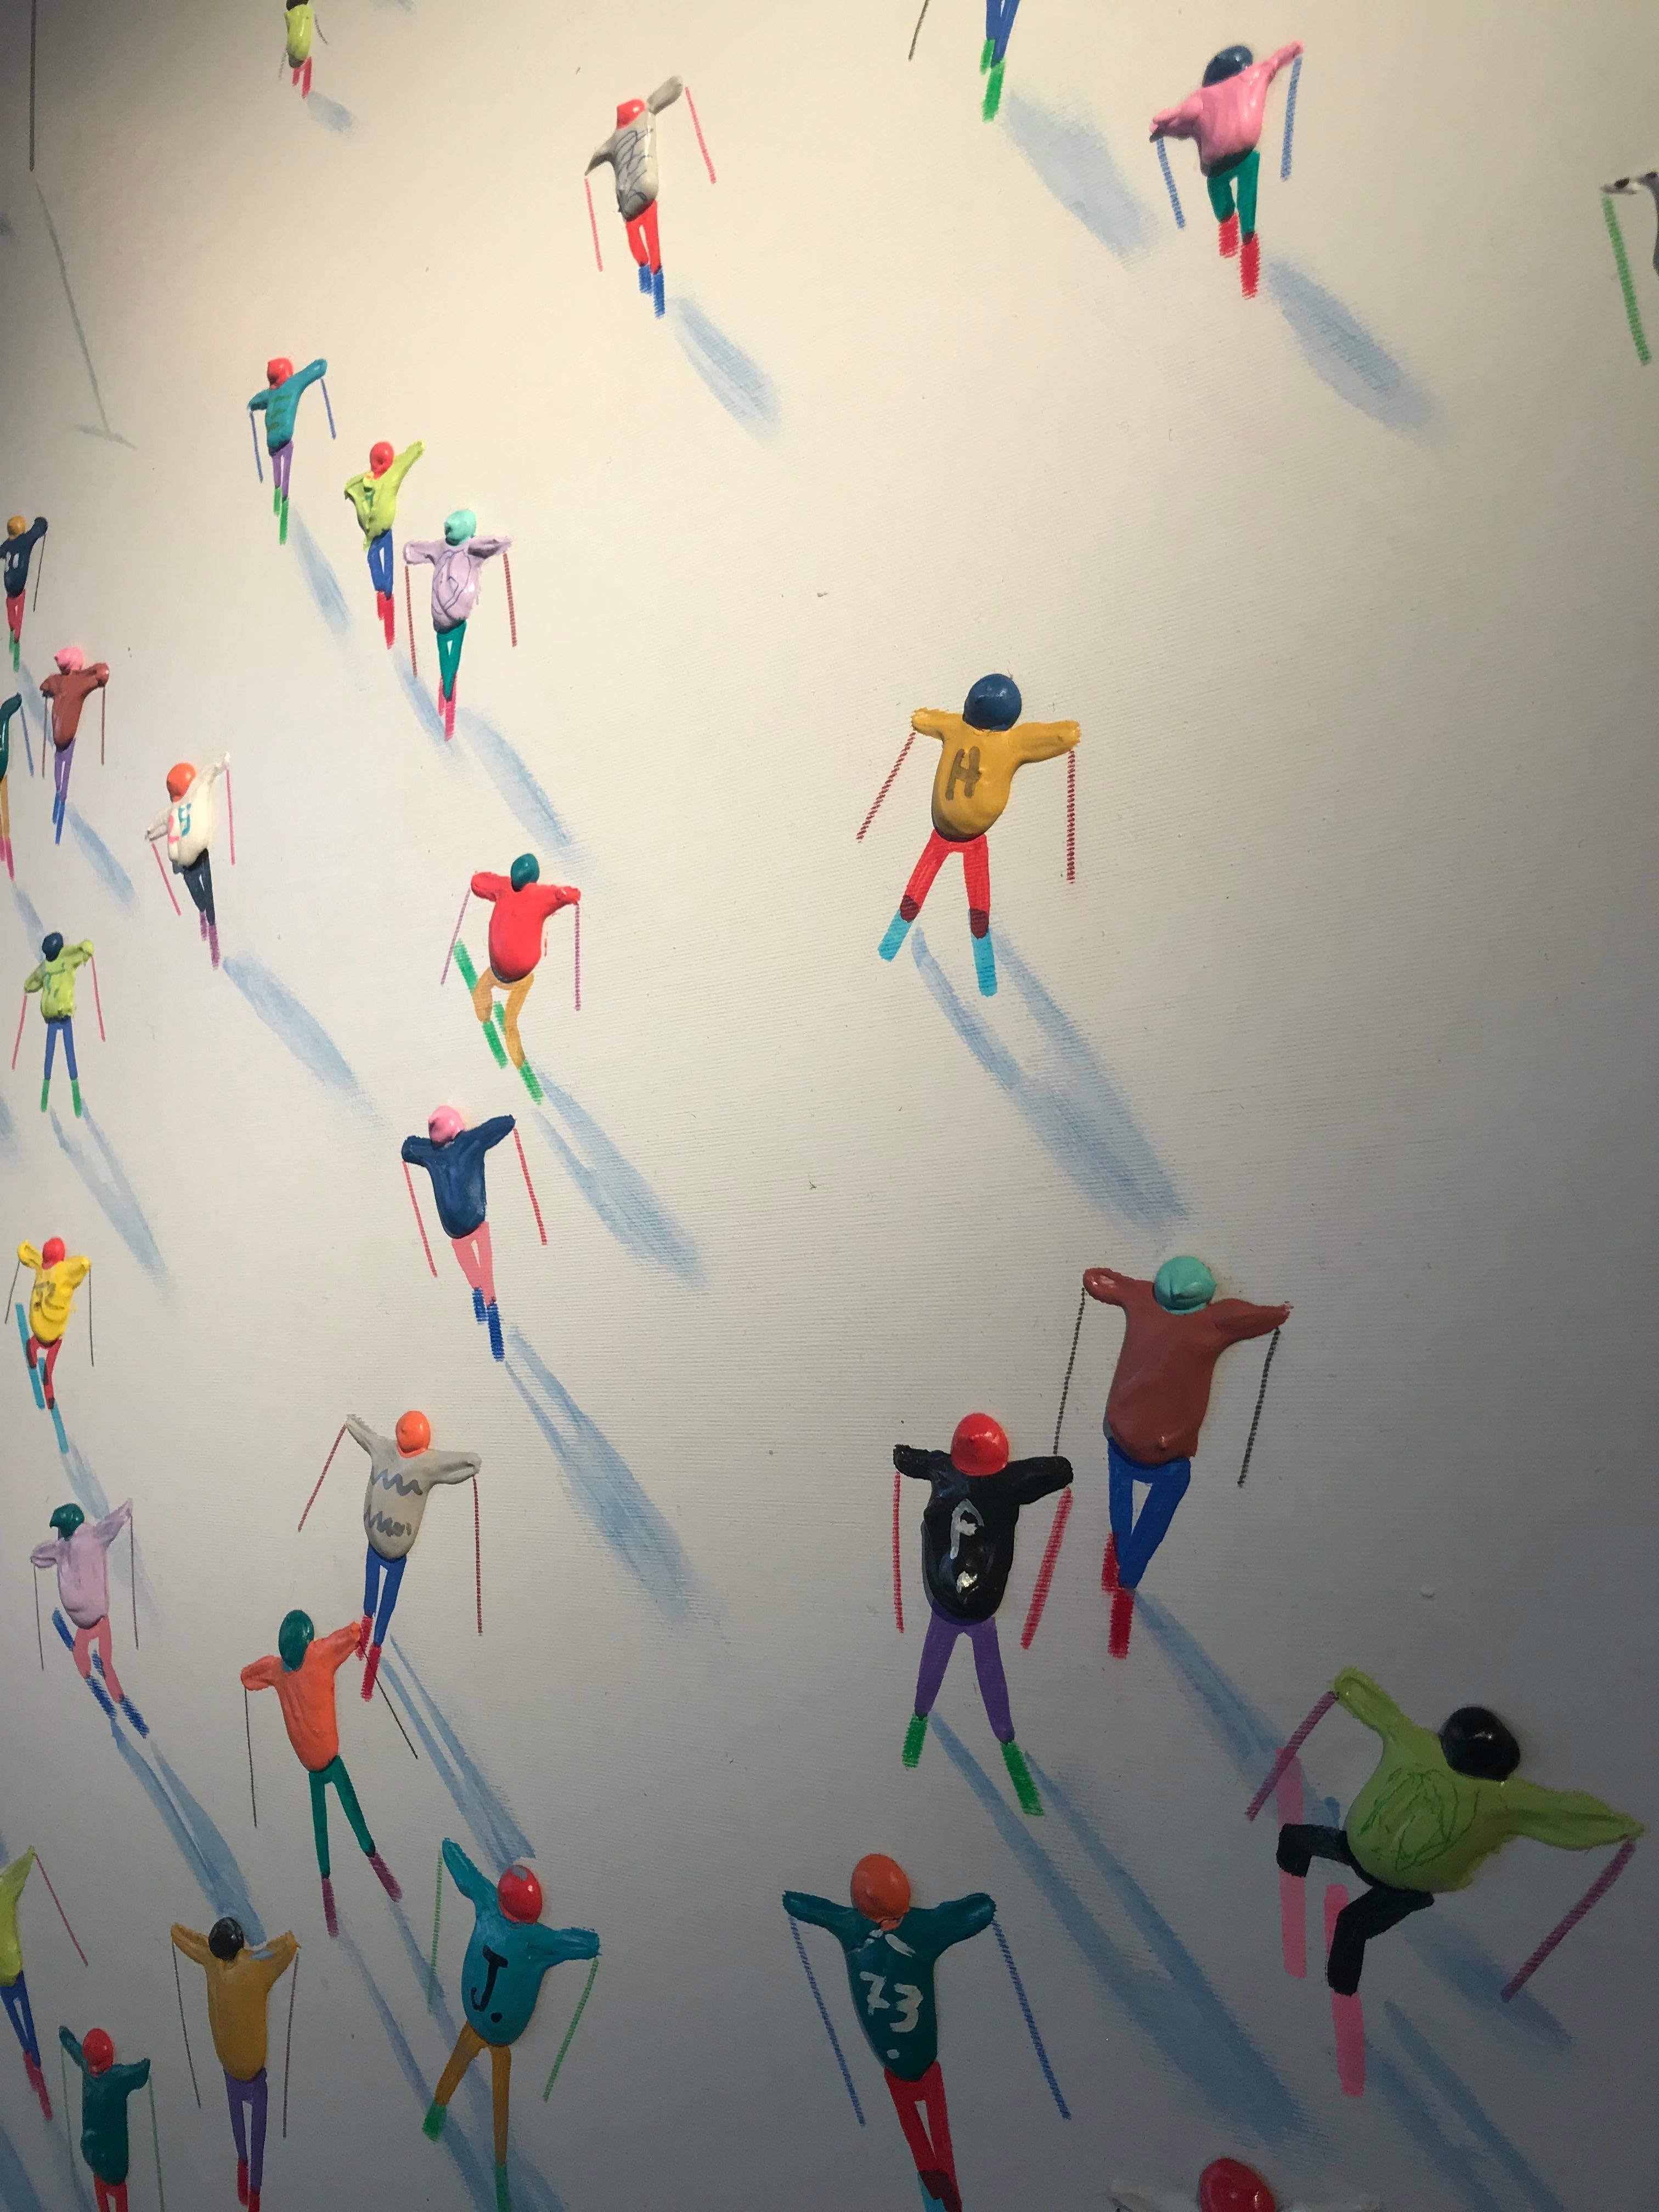 'Ski School' is a fun and vibrant piece that just pops off the wall. It is extraordinarily unconventional and sure to inspire conversation. Combining his love of skiing with his skill as an artist Todd has created a series which are fun and make you